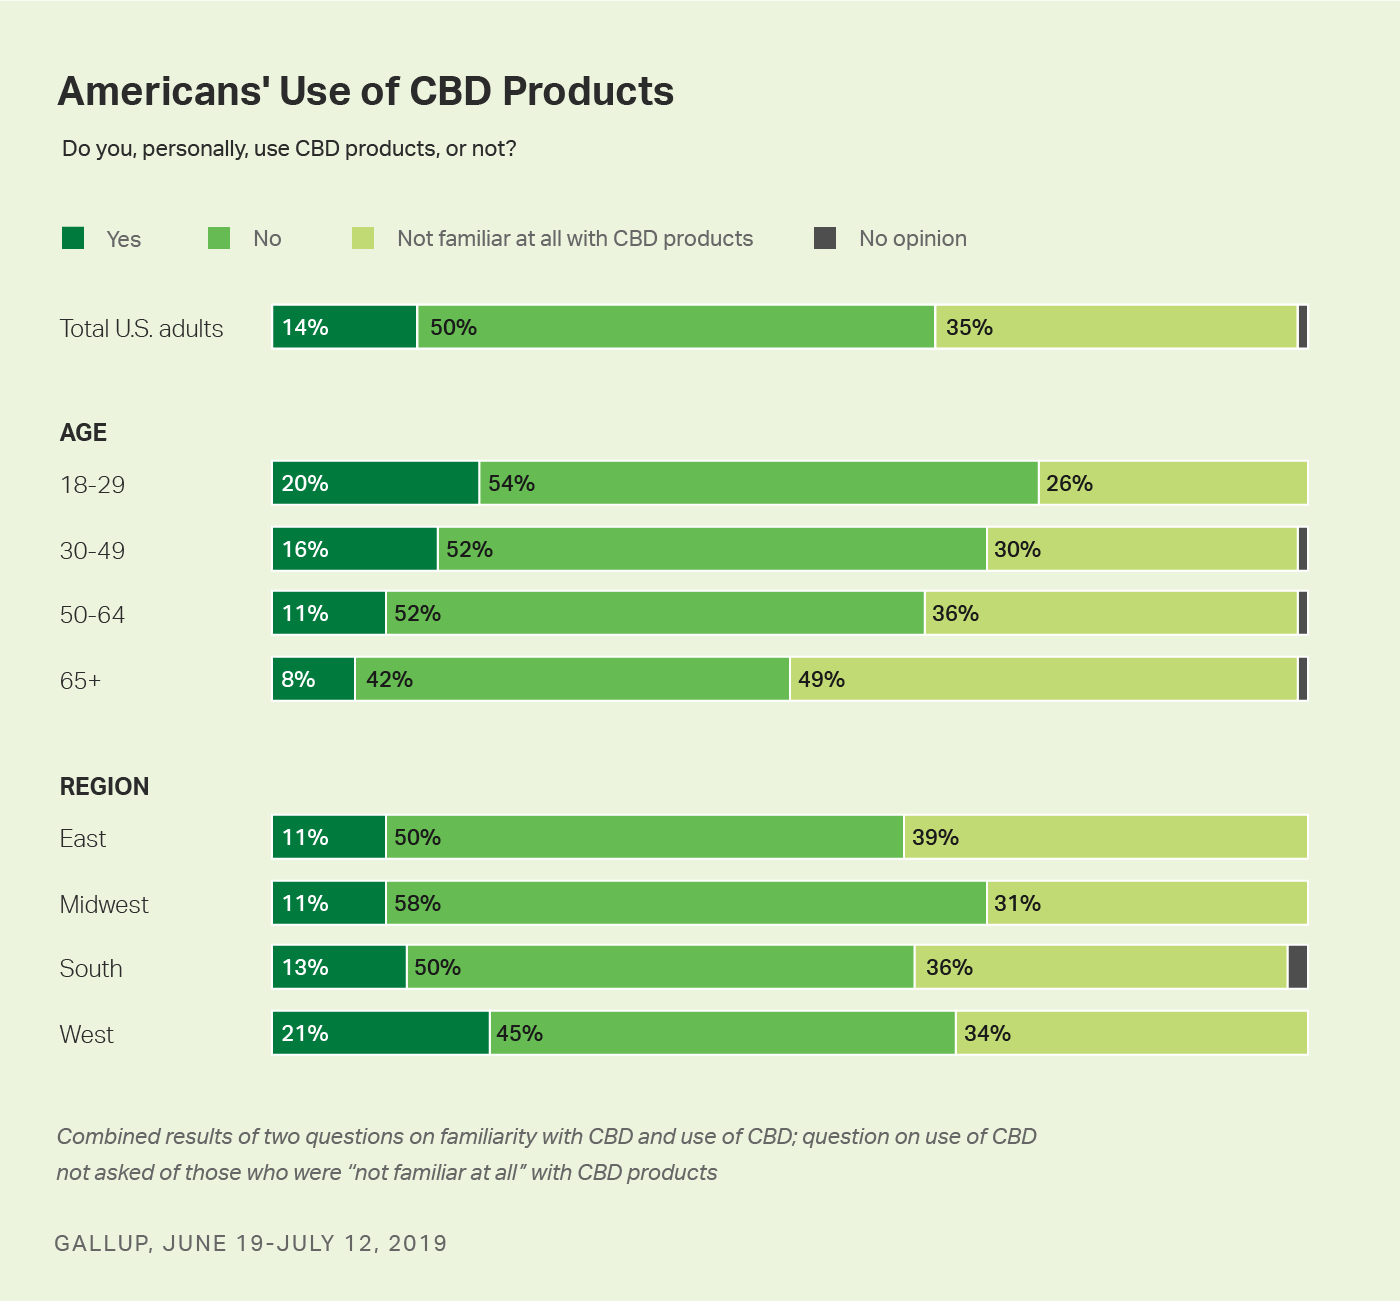 Bar charts. Self-reported use of CBD-based products among all U.S. adults, broken down by age group and regional area.